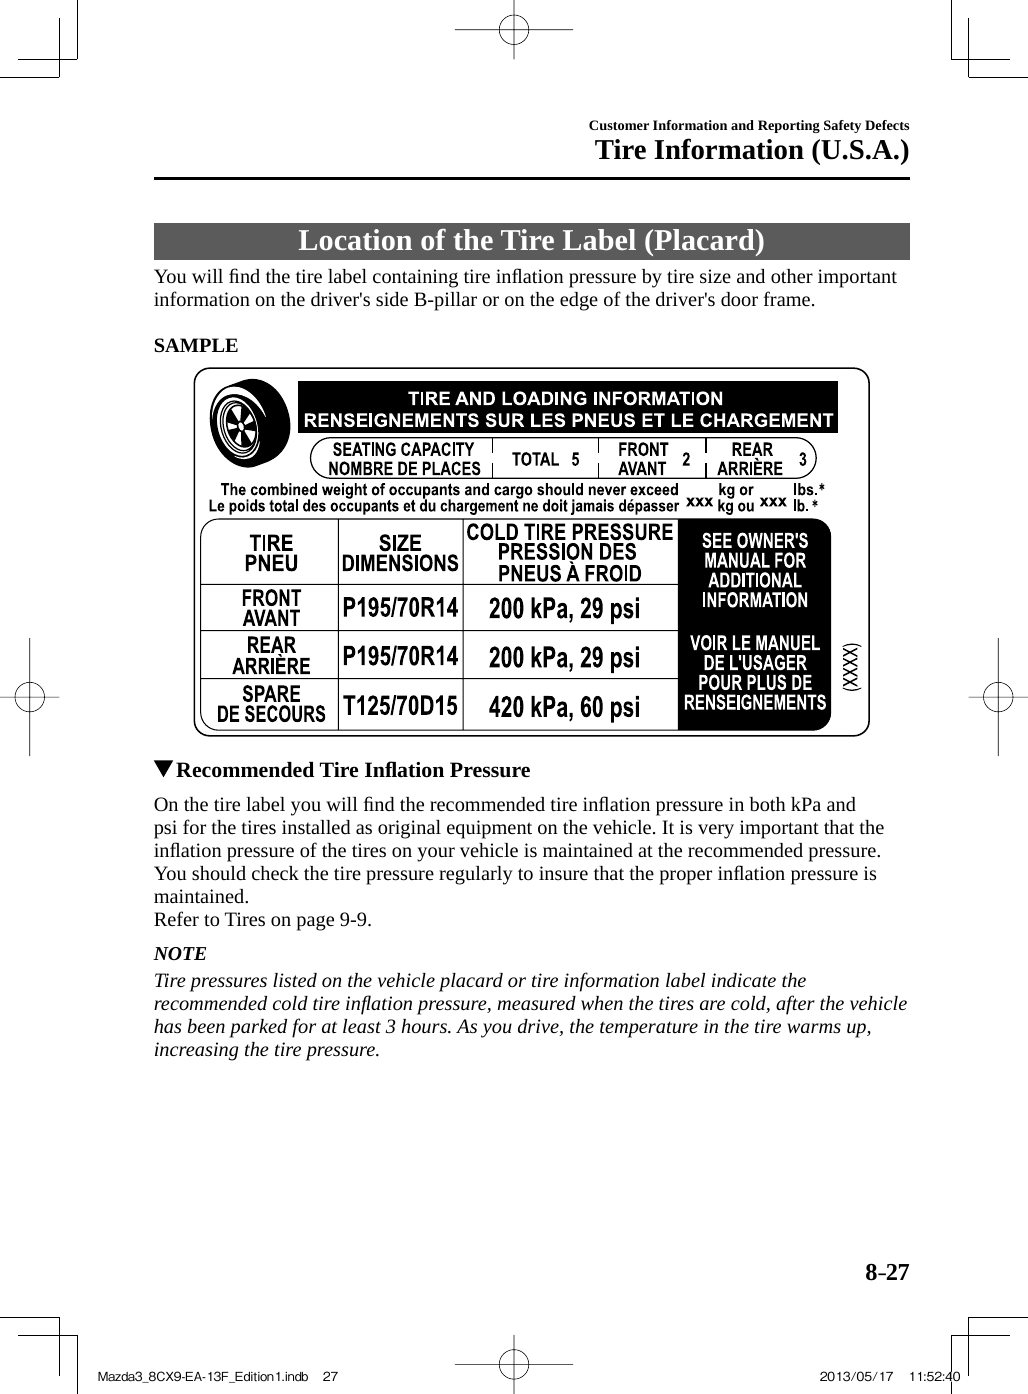 8–27Customer Information and Reporting Safety DefectsTire Information (U.S.A.) Location of the Tire Label (Placard)    You  will  ﬁ nd the tire label containing tire inﬂ ation pressure by tire size and other important information on the driver&apos;s side B-pillar or on the edge of the driver&apos;s door frame.     SAMPLE            Recommended Tire Inﬂ ation Pressure    On the tire label you will ﬁ nd the recommended tire inﬂ ation pressure in both kPa and psi for the tires installed as original equipment on the vehicle. It is very important that the inﬂ ation pressure of the tires on your vehicle is maintained at the recommended pressure. You should check the tire pressure regularly to insure that the proper inﬂ ation pressure is maintained.Refer to Tires on page   9-9 .  NOTE  Tire pressures listed on the vehicle placard or tire information label indicate the recommended cold tire inﬂ ation pressure, measured when the tires are cold, after the vehicle has been parked for at least 3 hours. As you drive, the temperature in the tire warms up, increasing the tire pressure.   Mazda3_8CX9-EA-13F_Edition1.indb   27Mazda3_8CX9-EA-13F_Edition1.indb   27 2013/05/17   11:52:402013/05/17   11:52:40